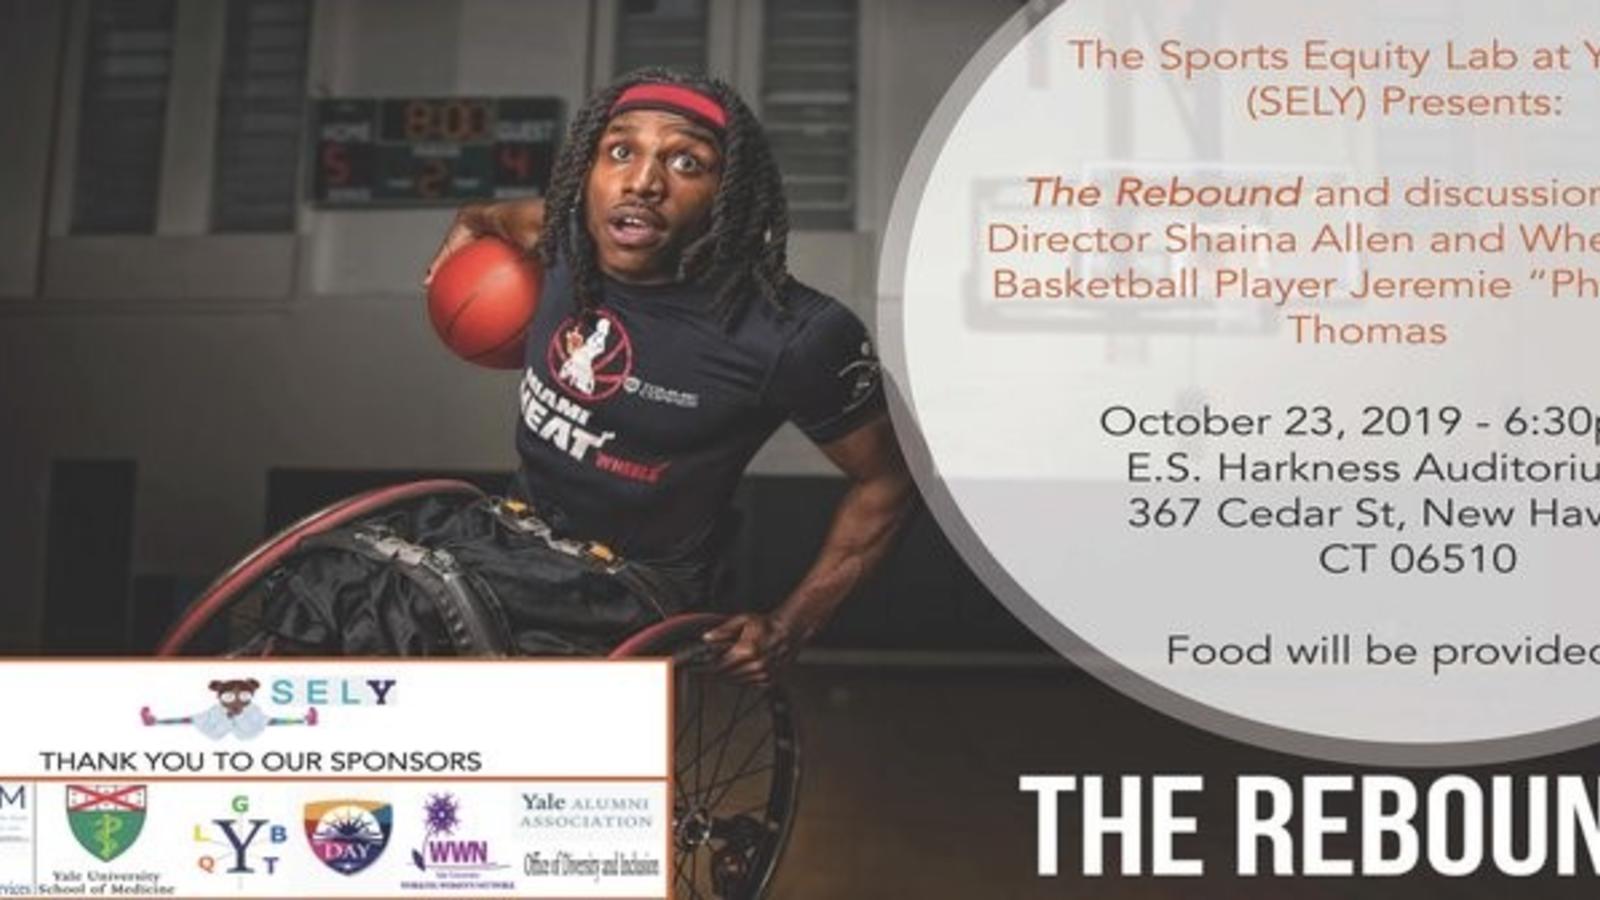 Promotional poster for "The Rebound," with a screening and discussion to follow.